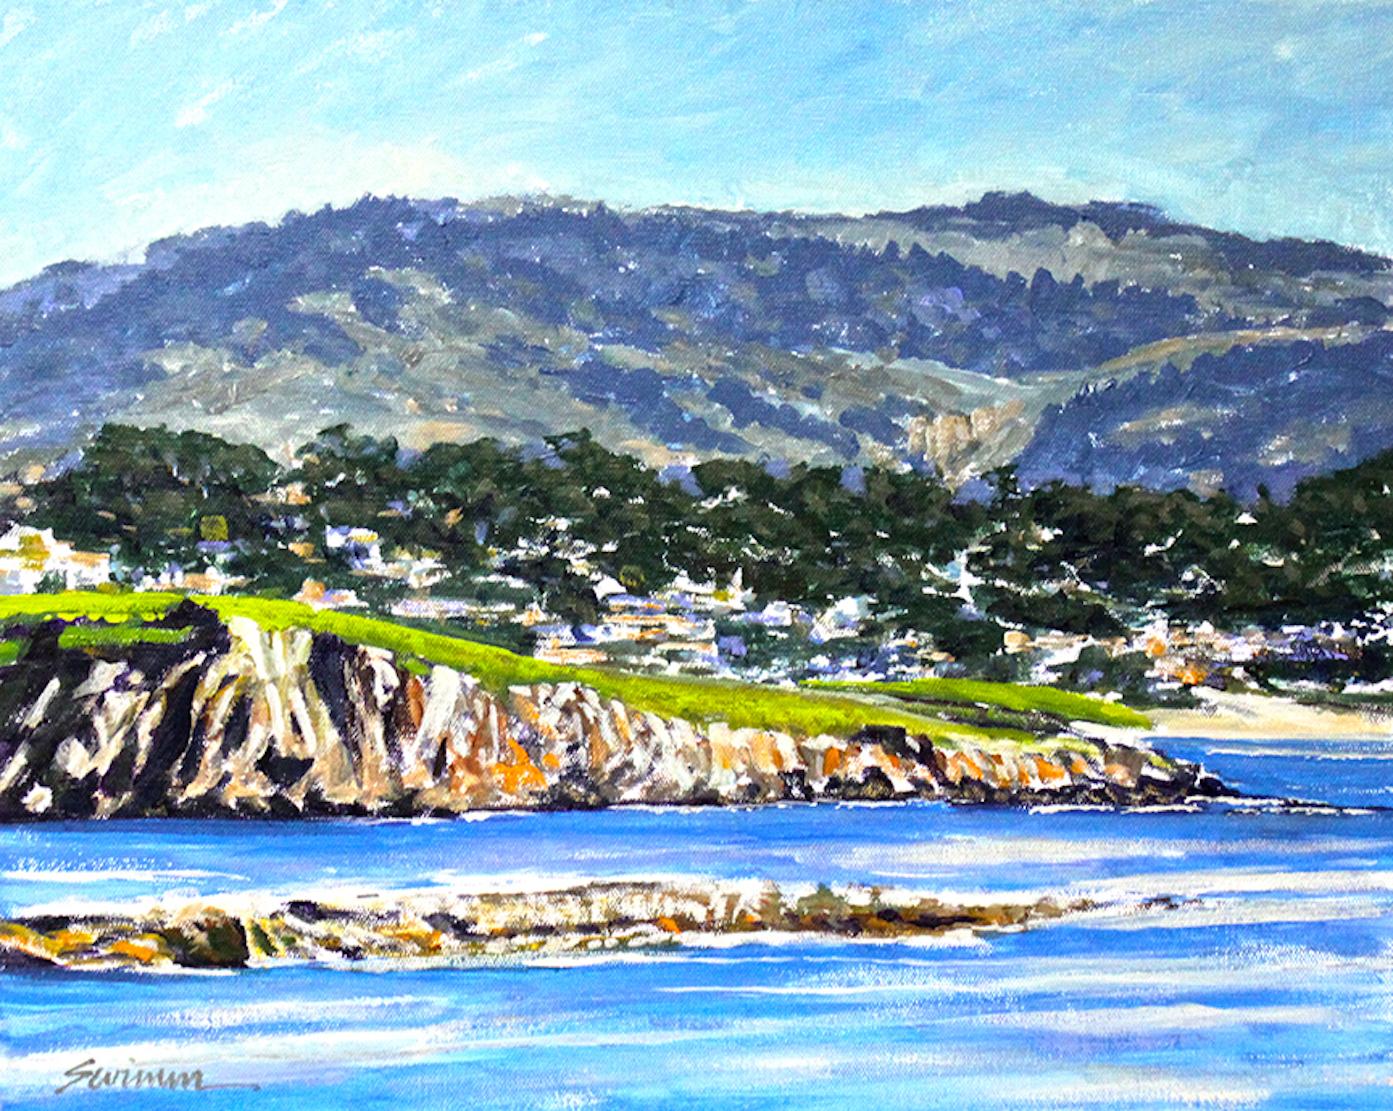 "Pebble Beach Panorama" View from the Pacific